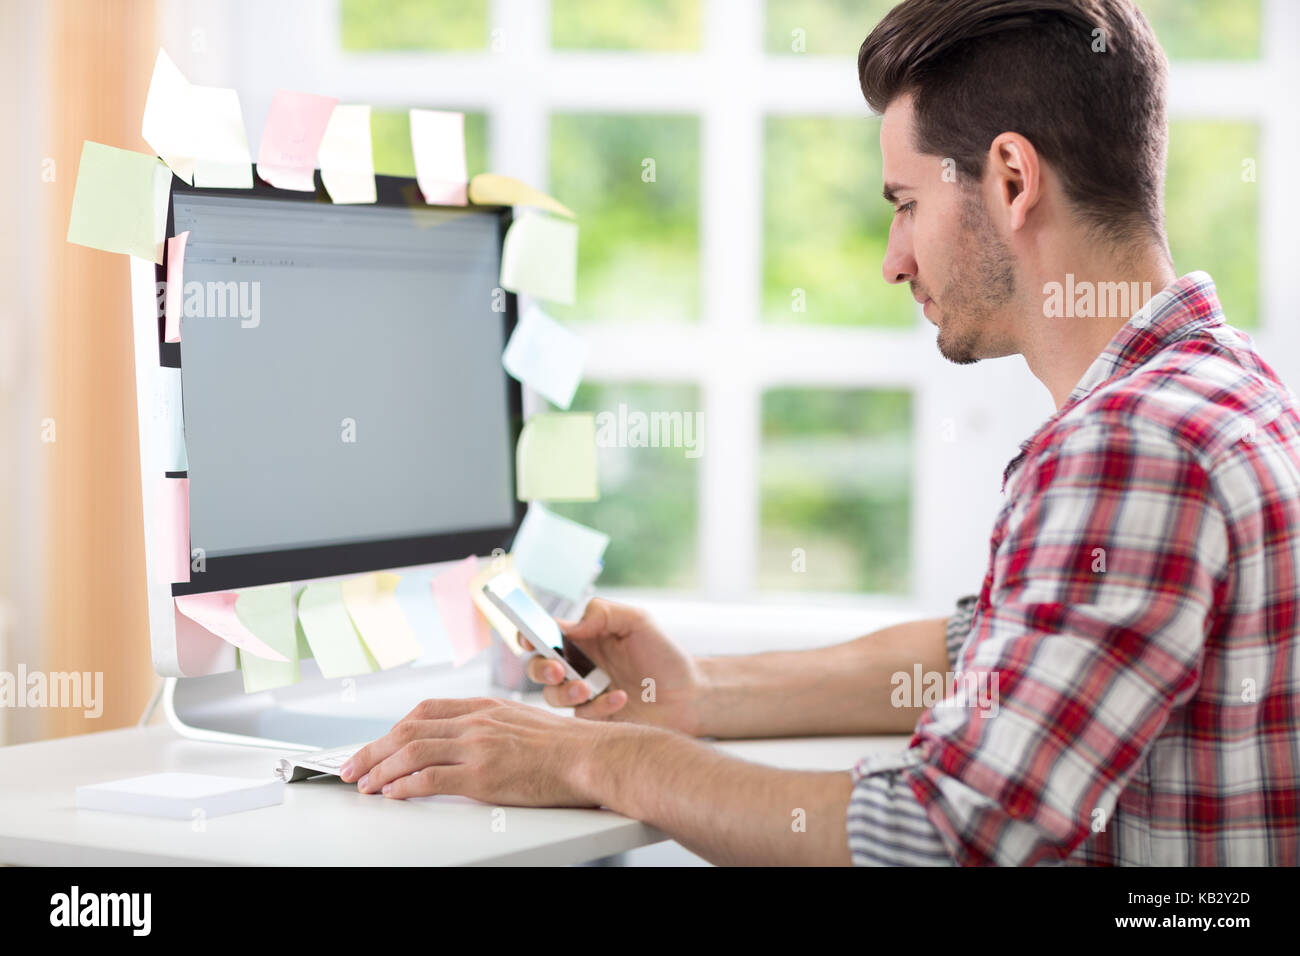 overworked man typing on computer with stickers on monitor Stock Photo